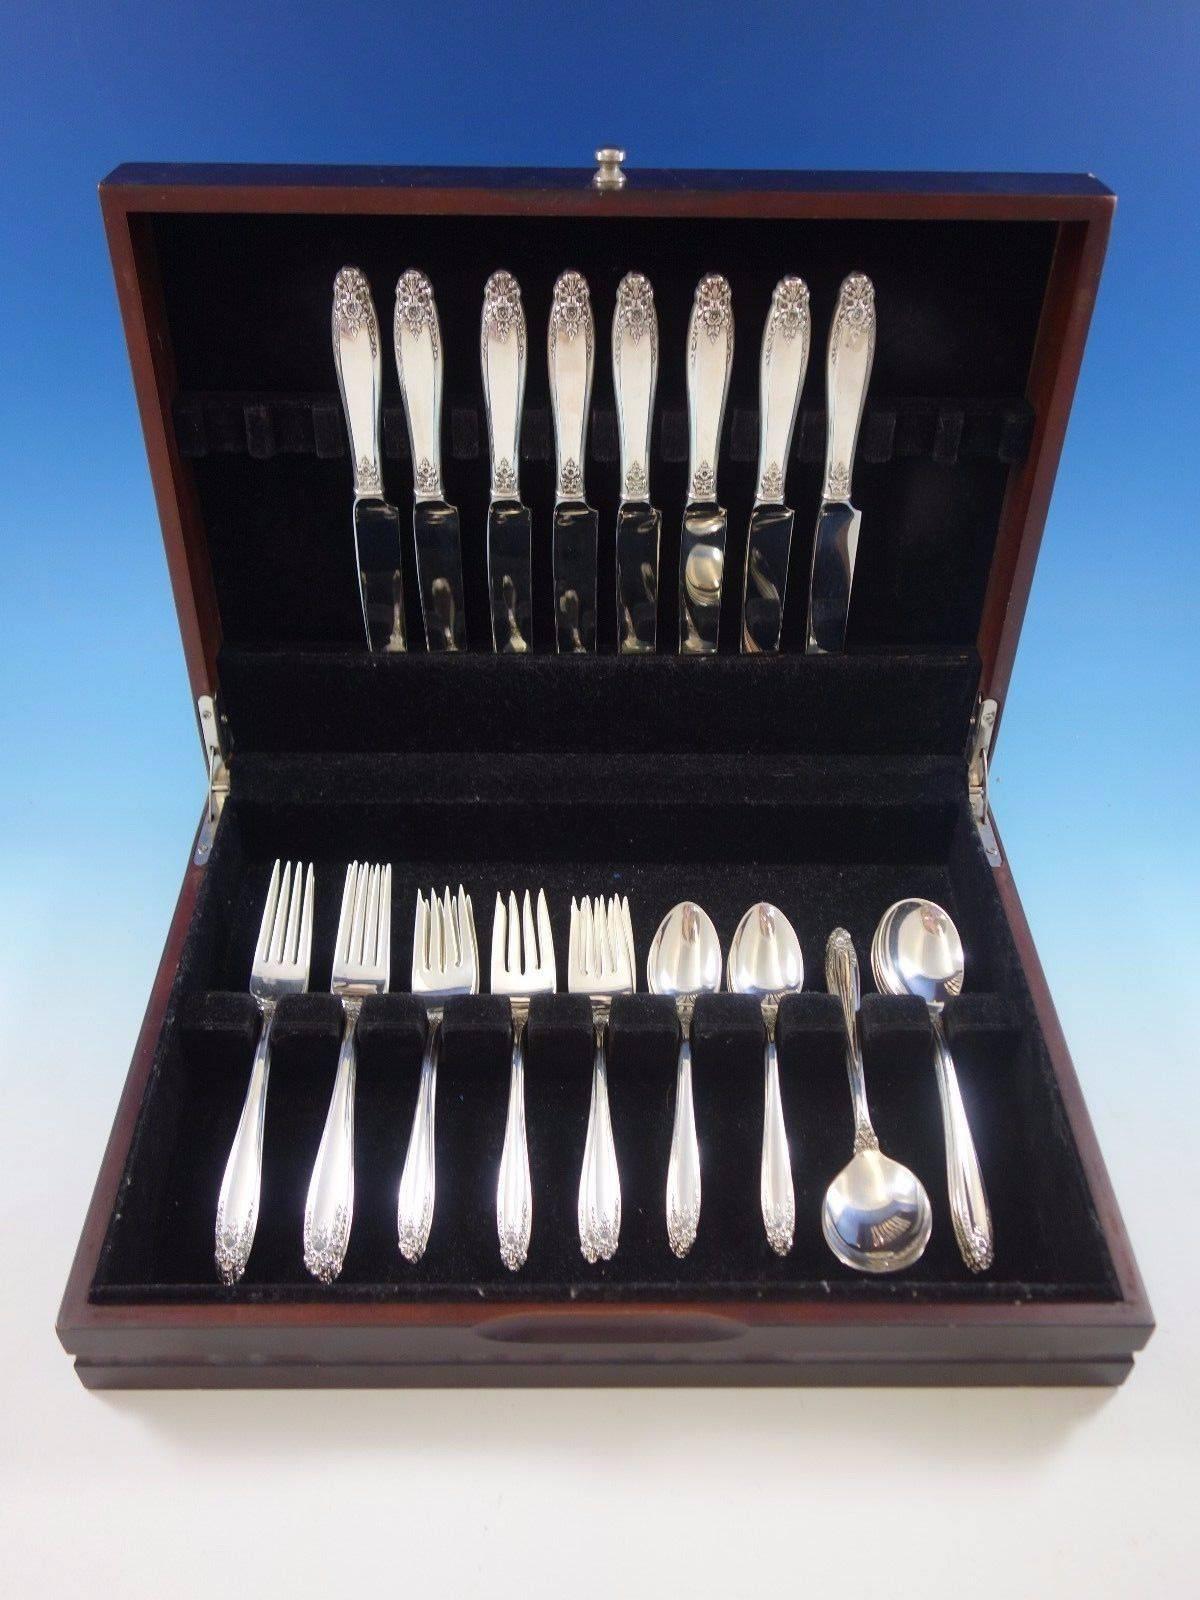 Prelude by International sterling silver flatware set, 40 pieces. This set includes: 

Eight knives, 9 1/4